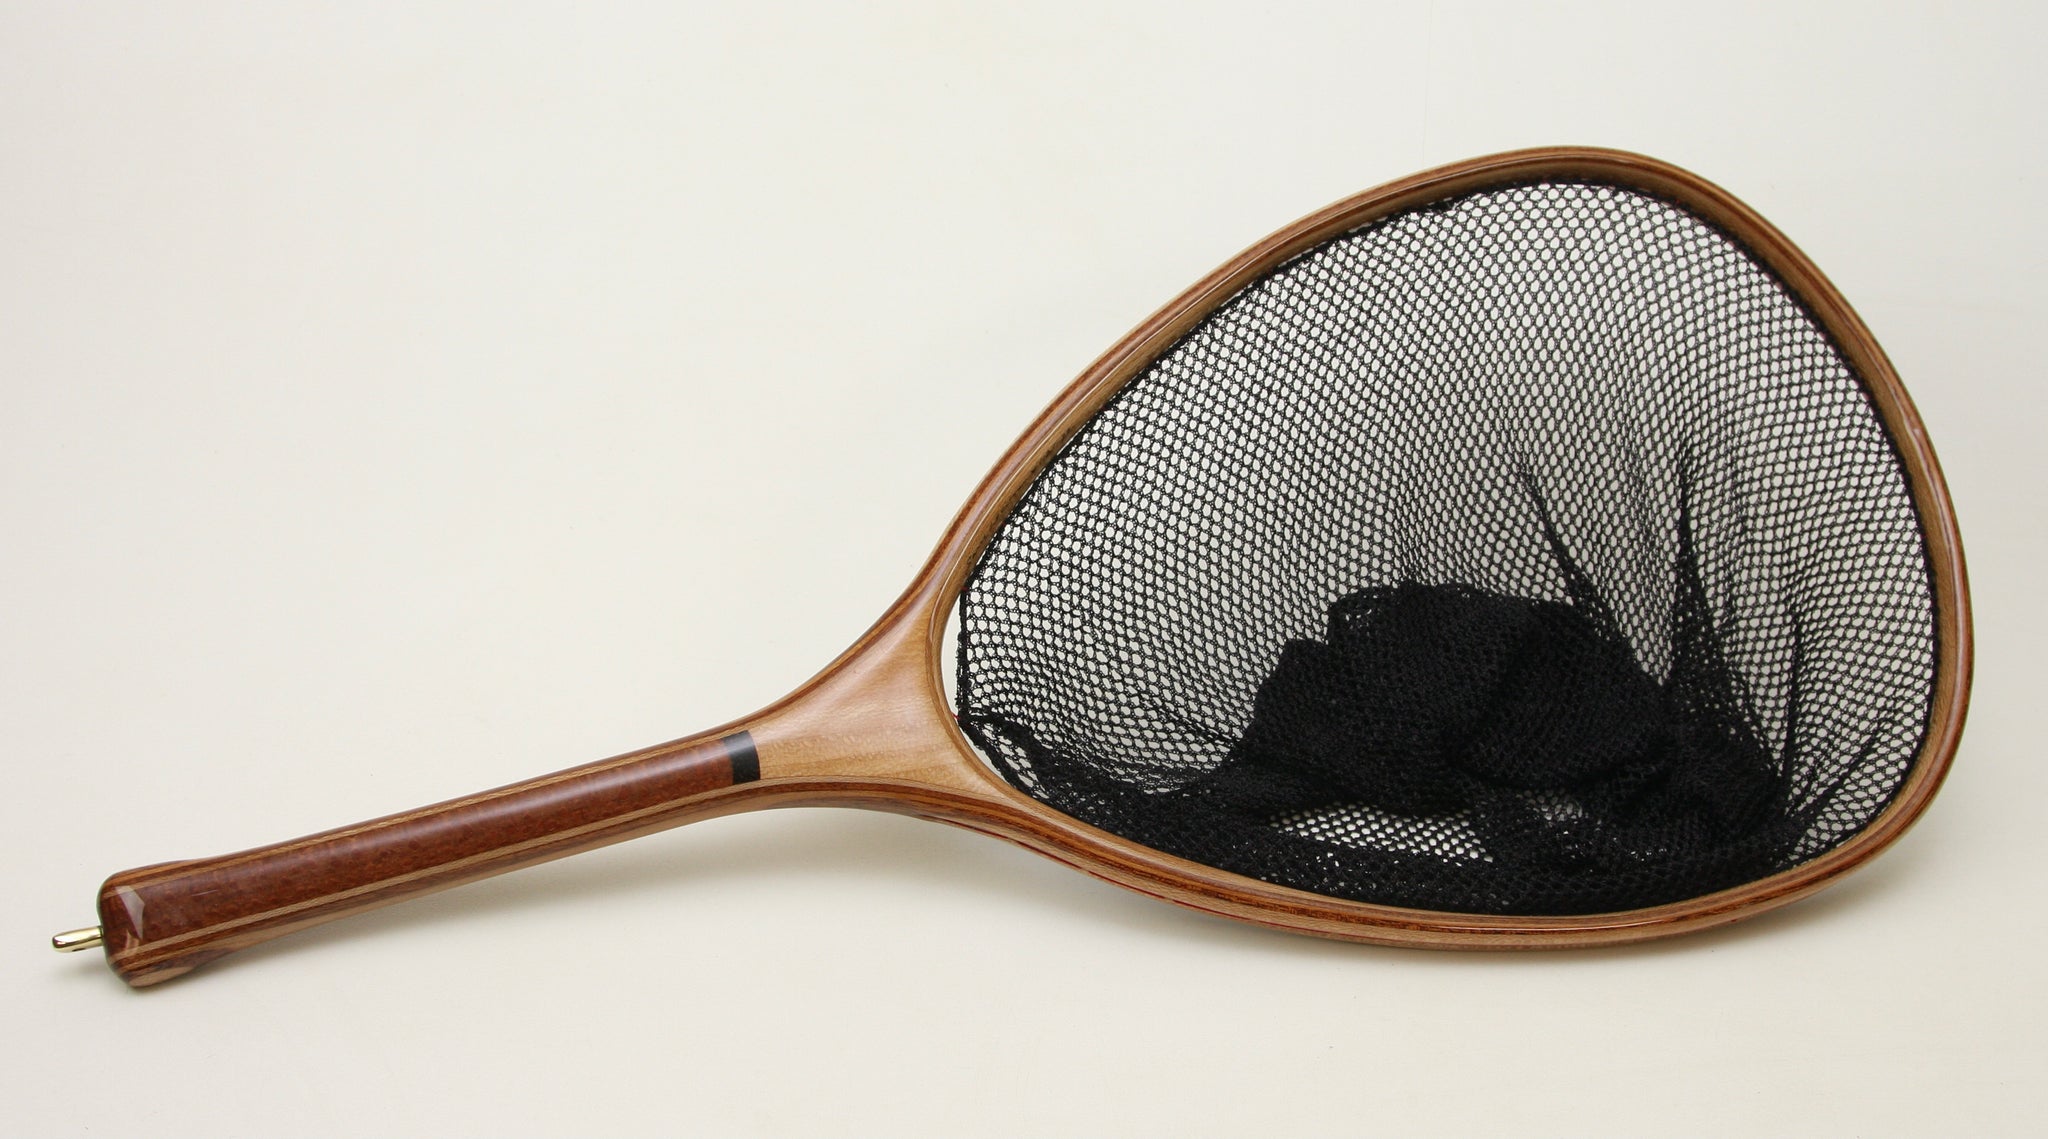 Large Landing Net in mixed colors and lace. - Nets that Honor the Fish